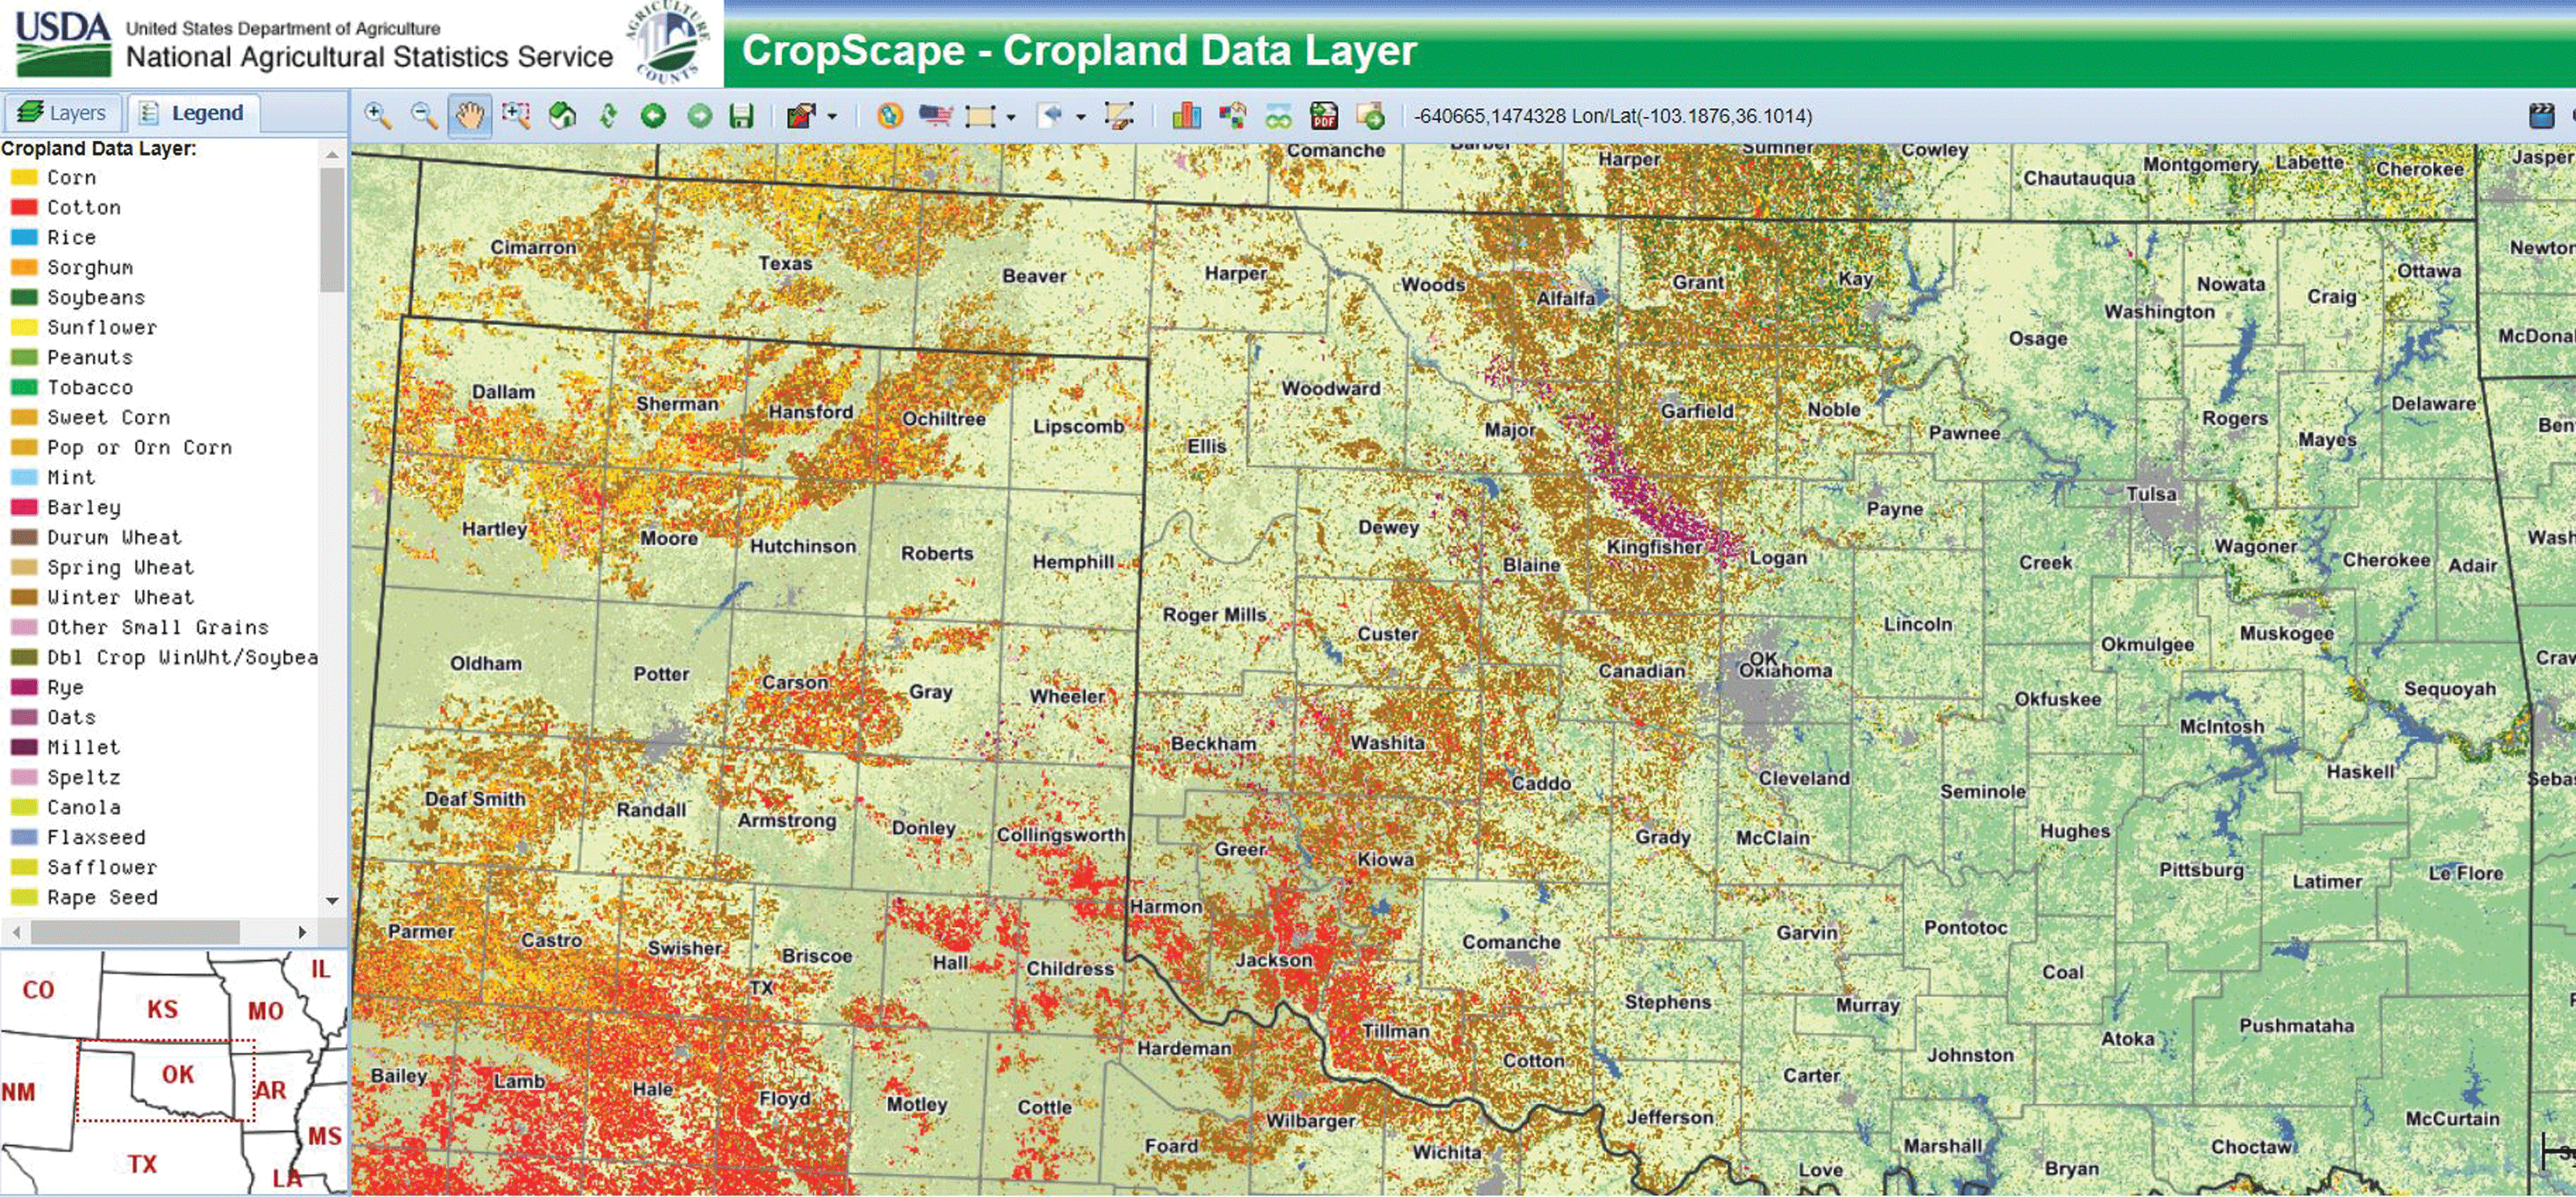 Cropland Data Layer map of Oklahoma showing mostly forest, grass and pasture, shrubland,
                     and wheat.